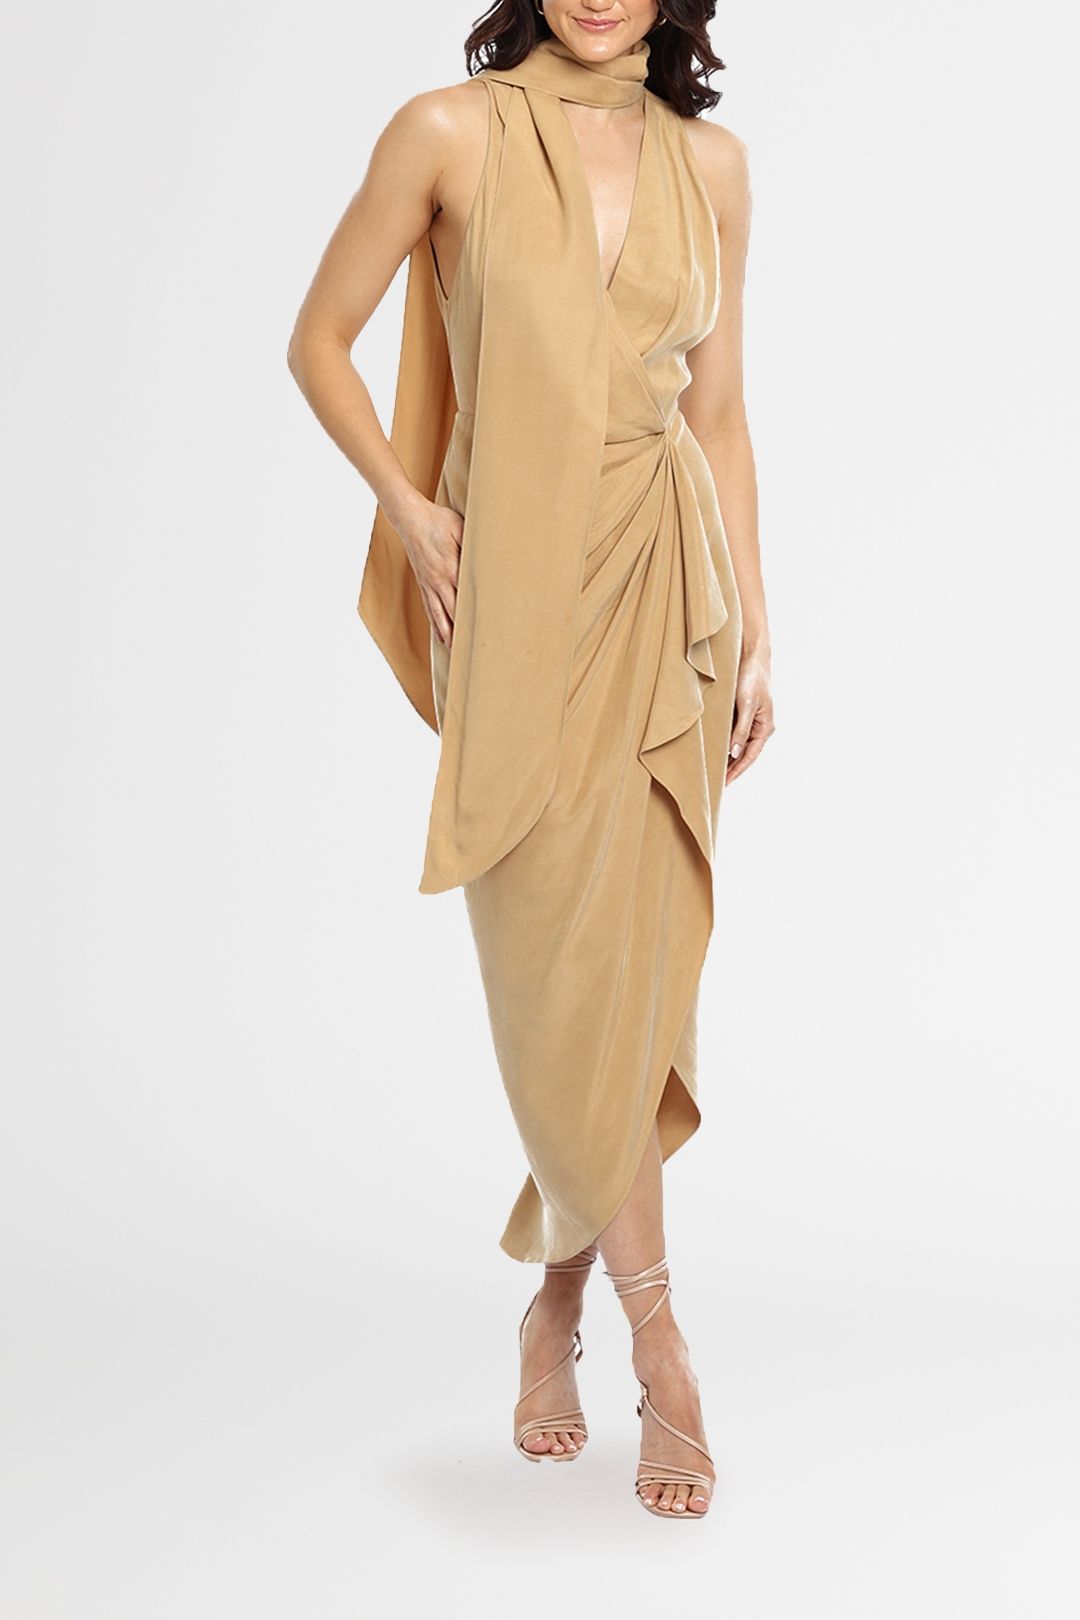 Acler Daleside Dress nude